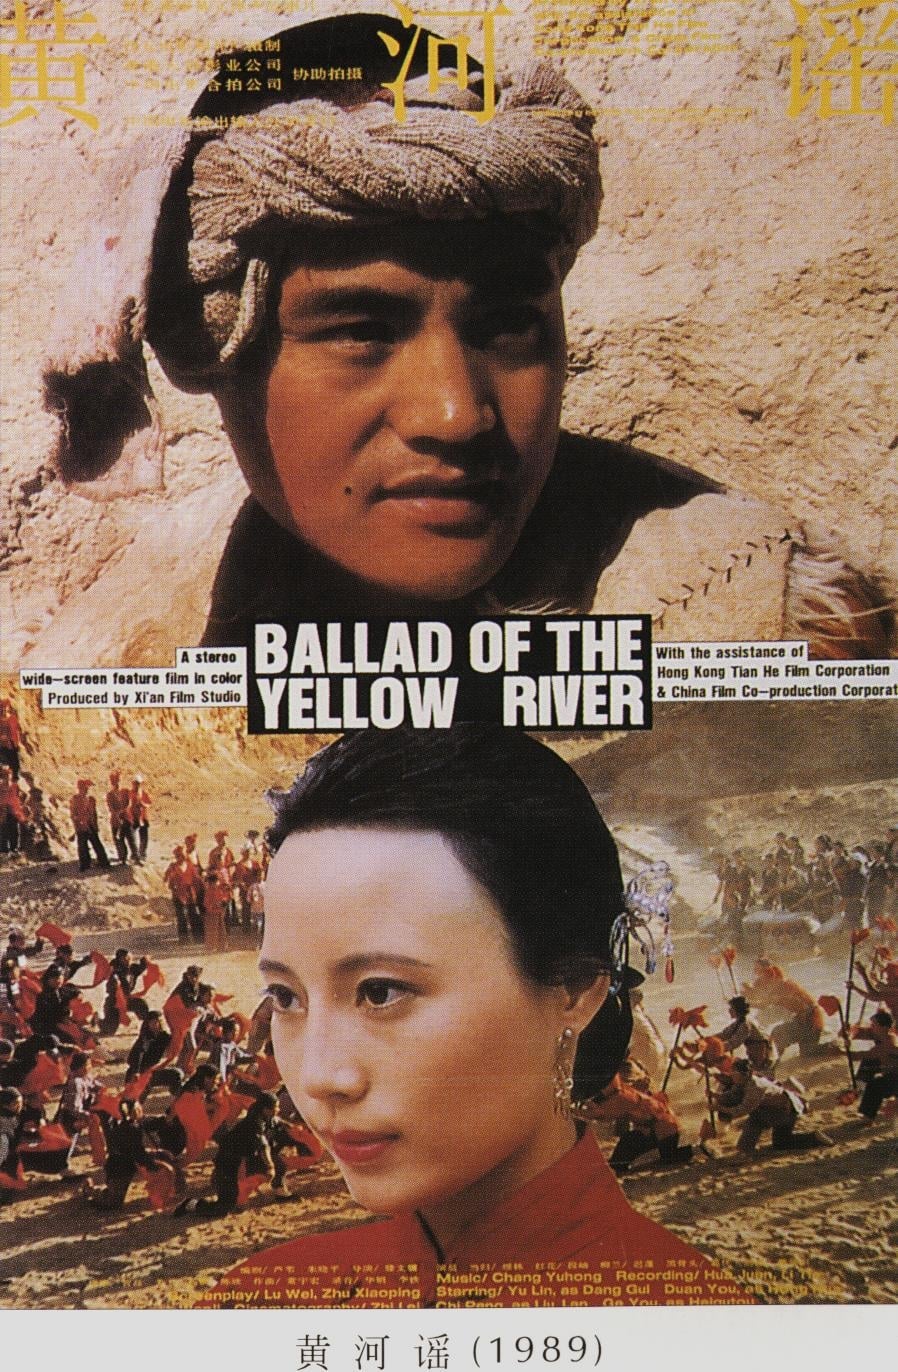 Ballad of the Yellow River